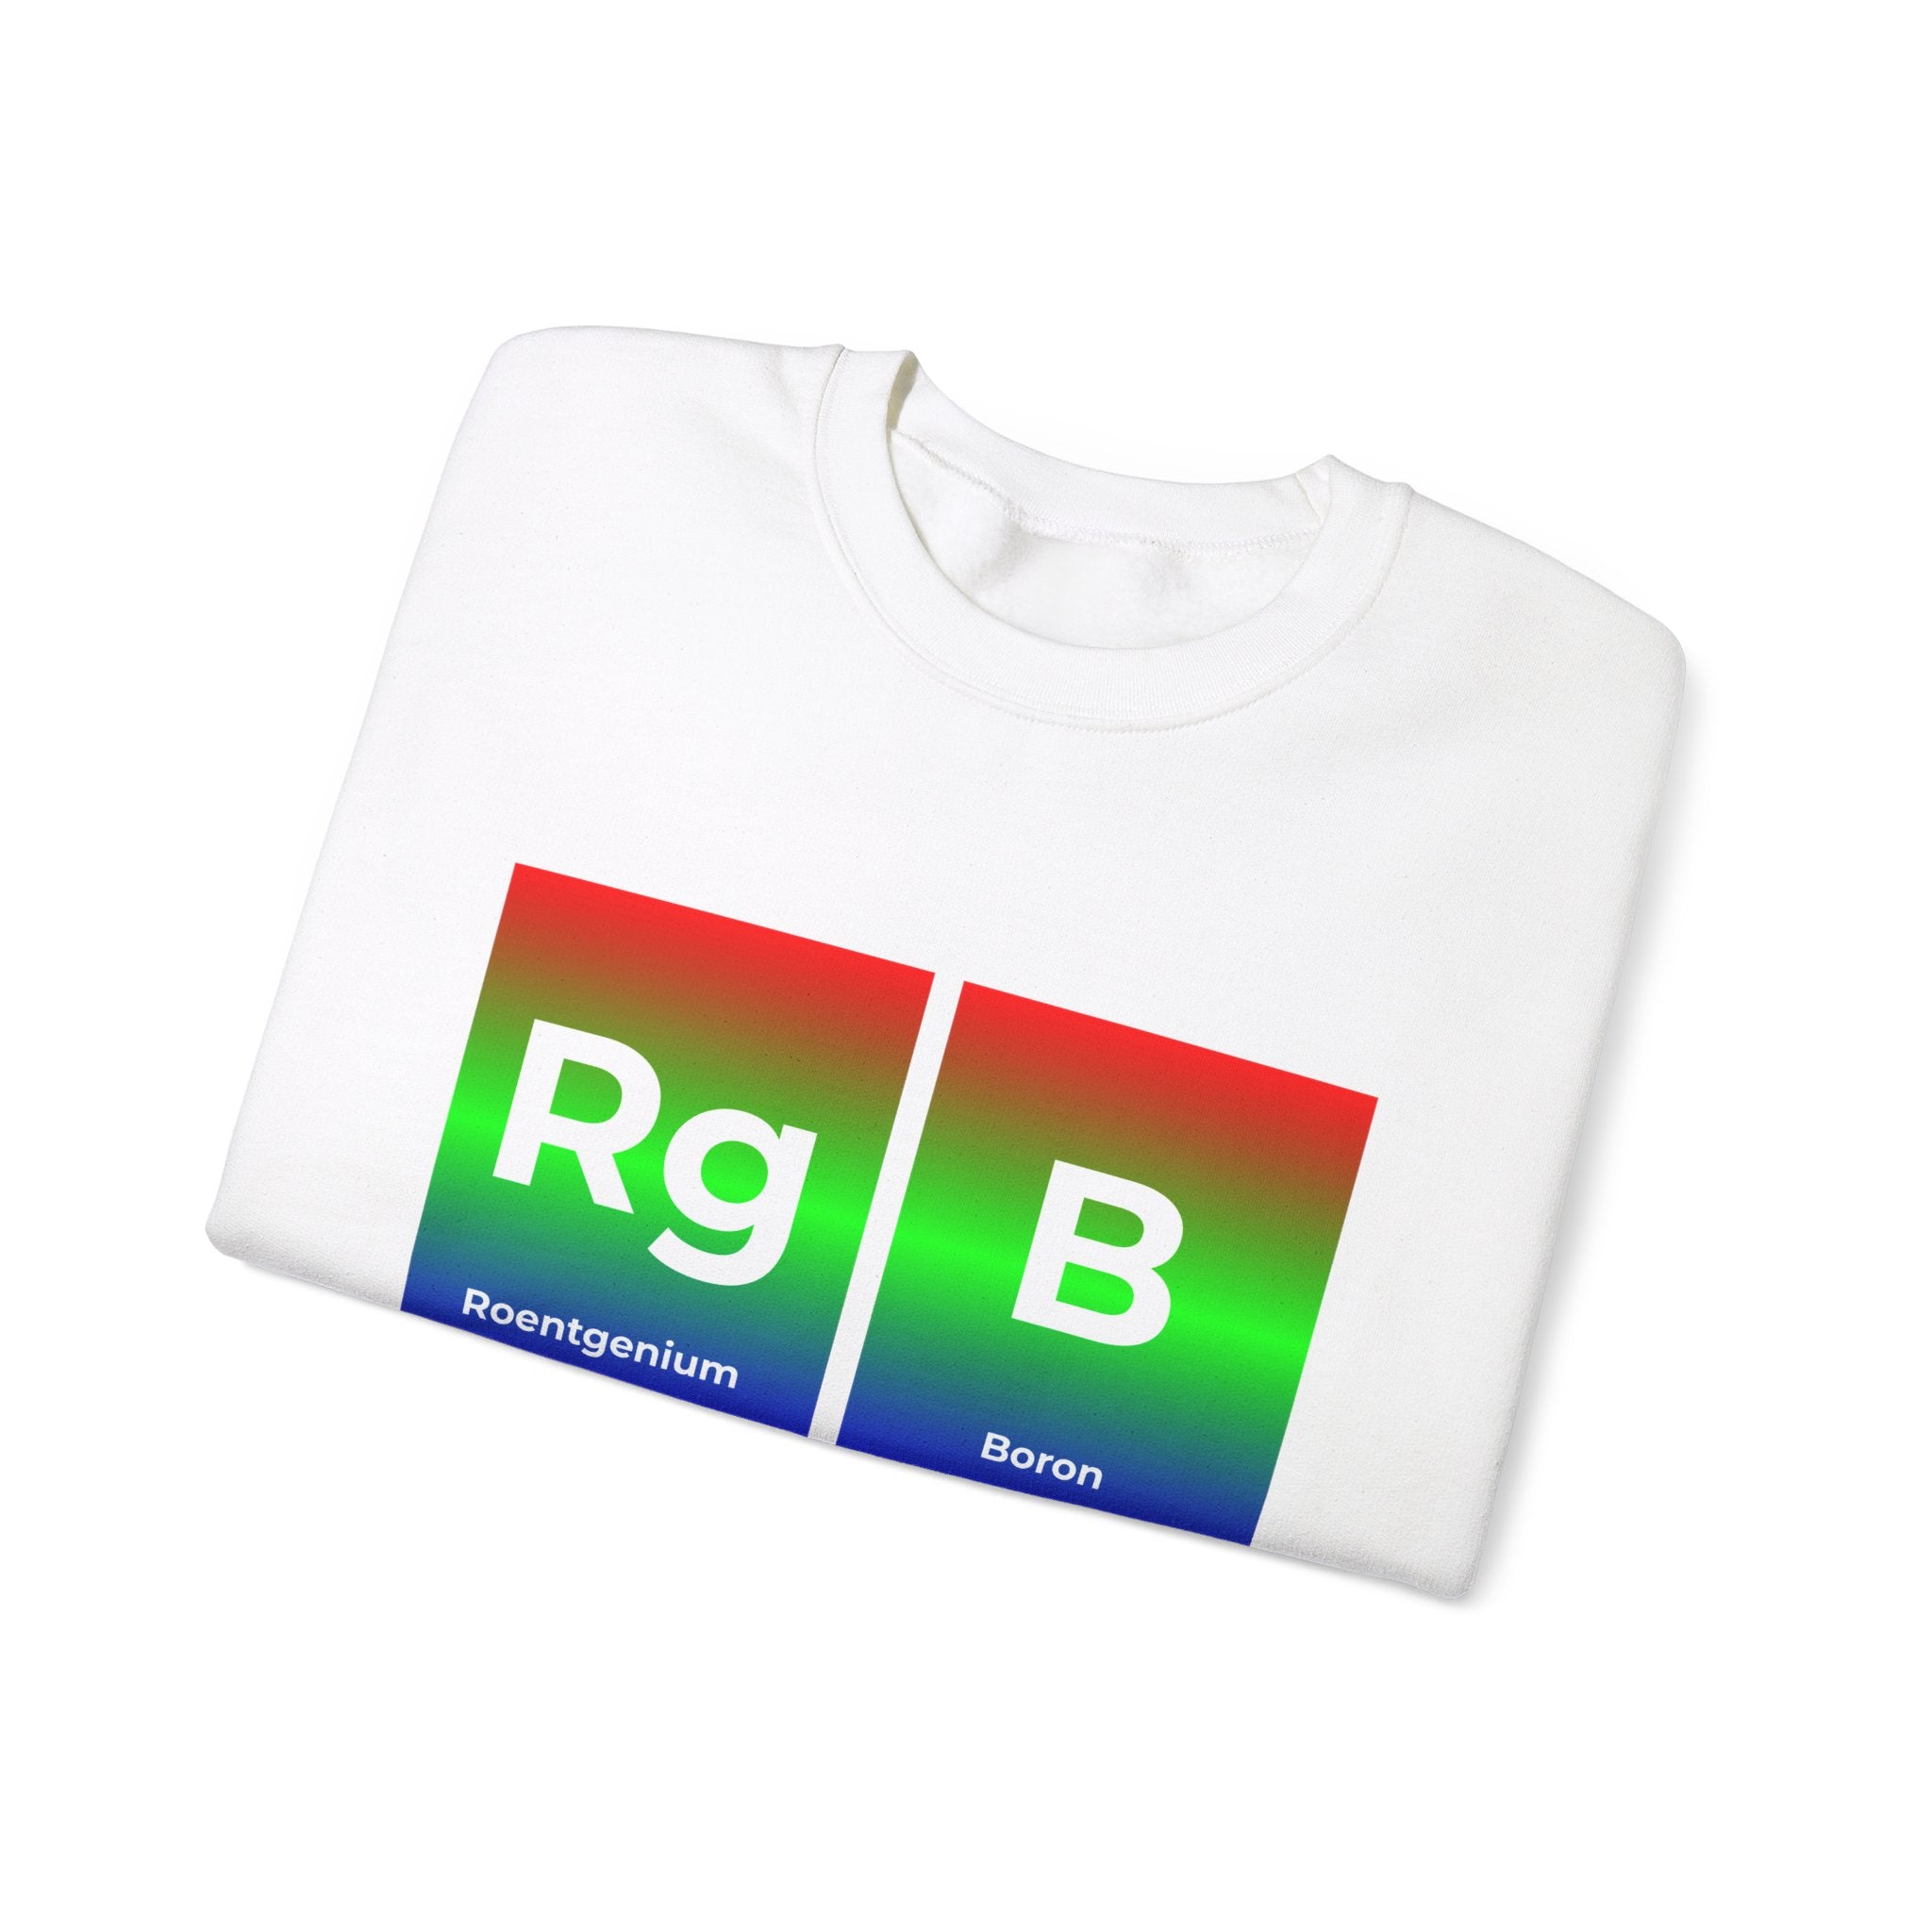 This cozy, folded white RG-B - Sweatshirt features a stylish periodic table design showcasing the elements Roentgenium (Rg) and Boron (B) in colored blocks, green at the bottom and red at the top.